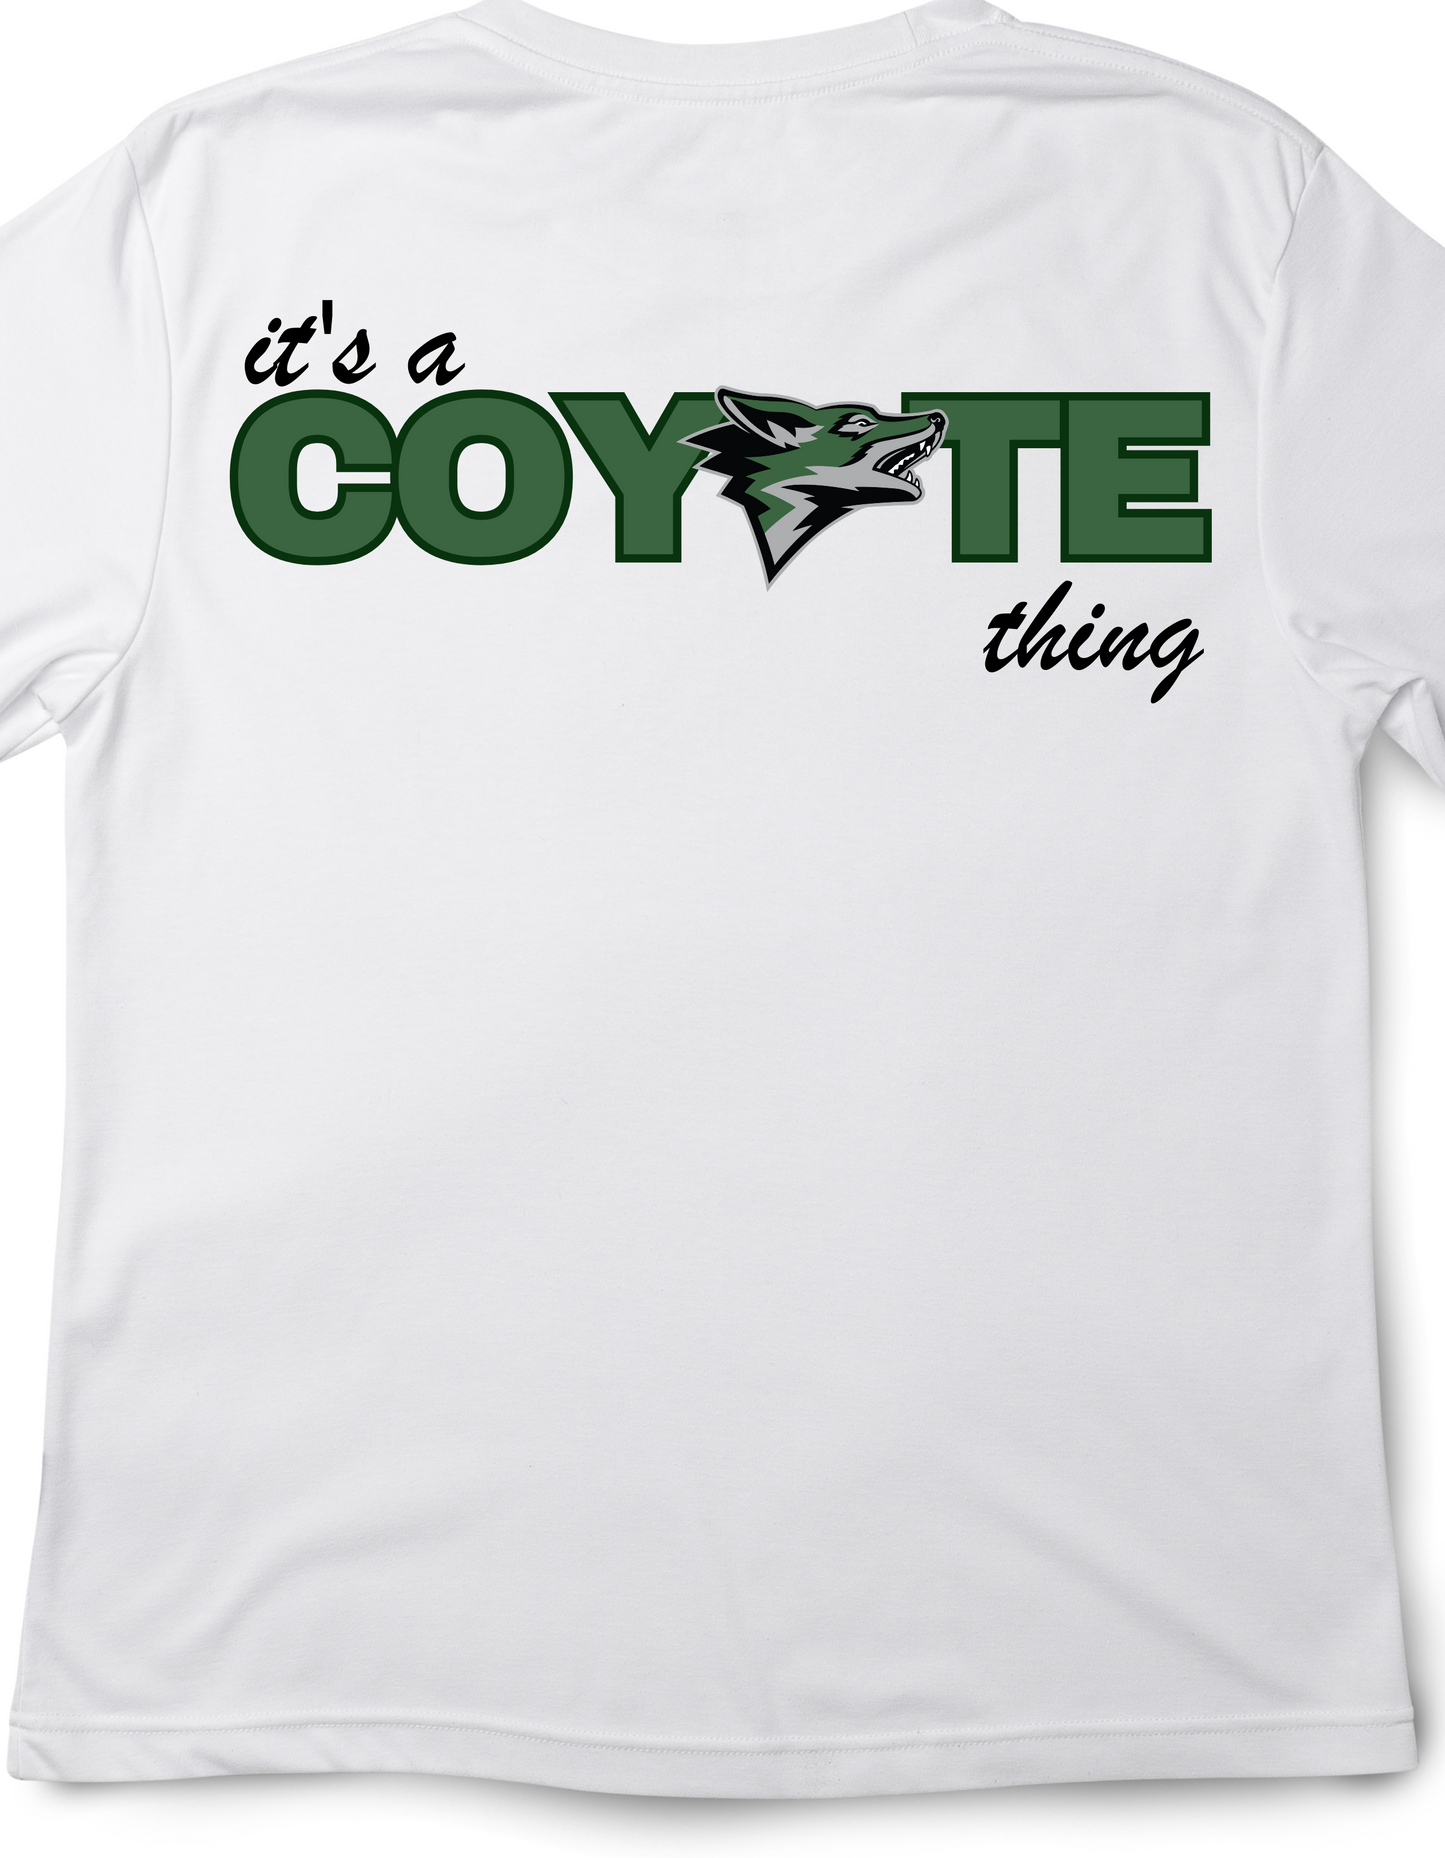 It's a Coyote thing